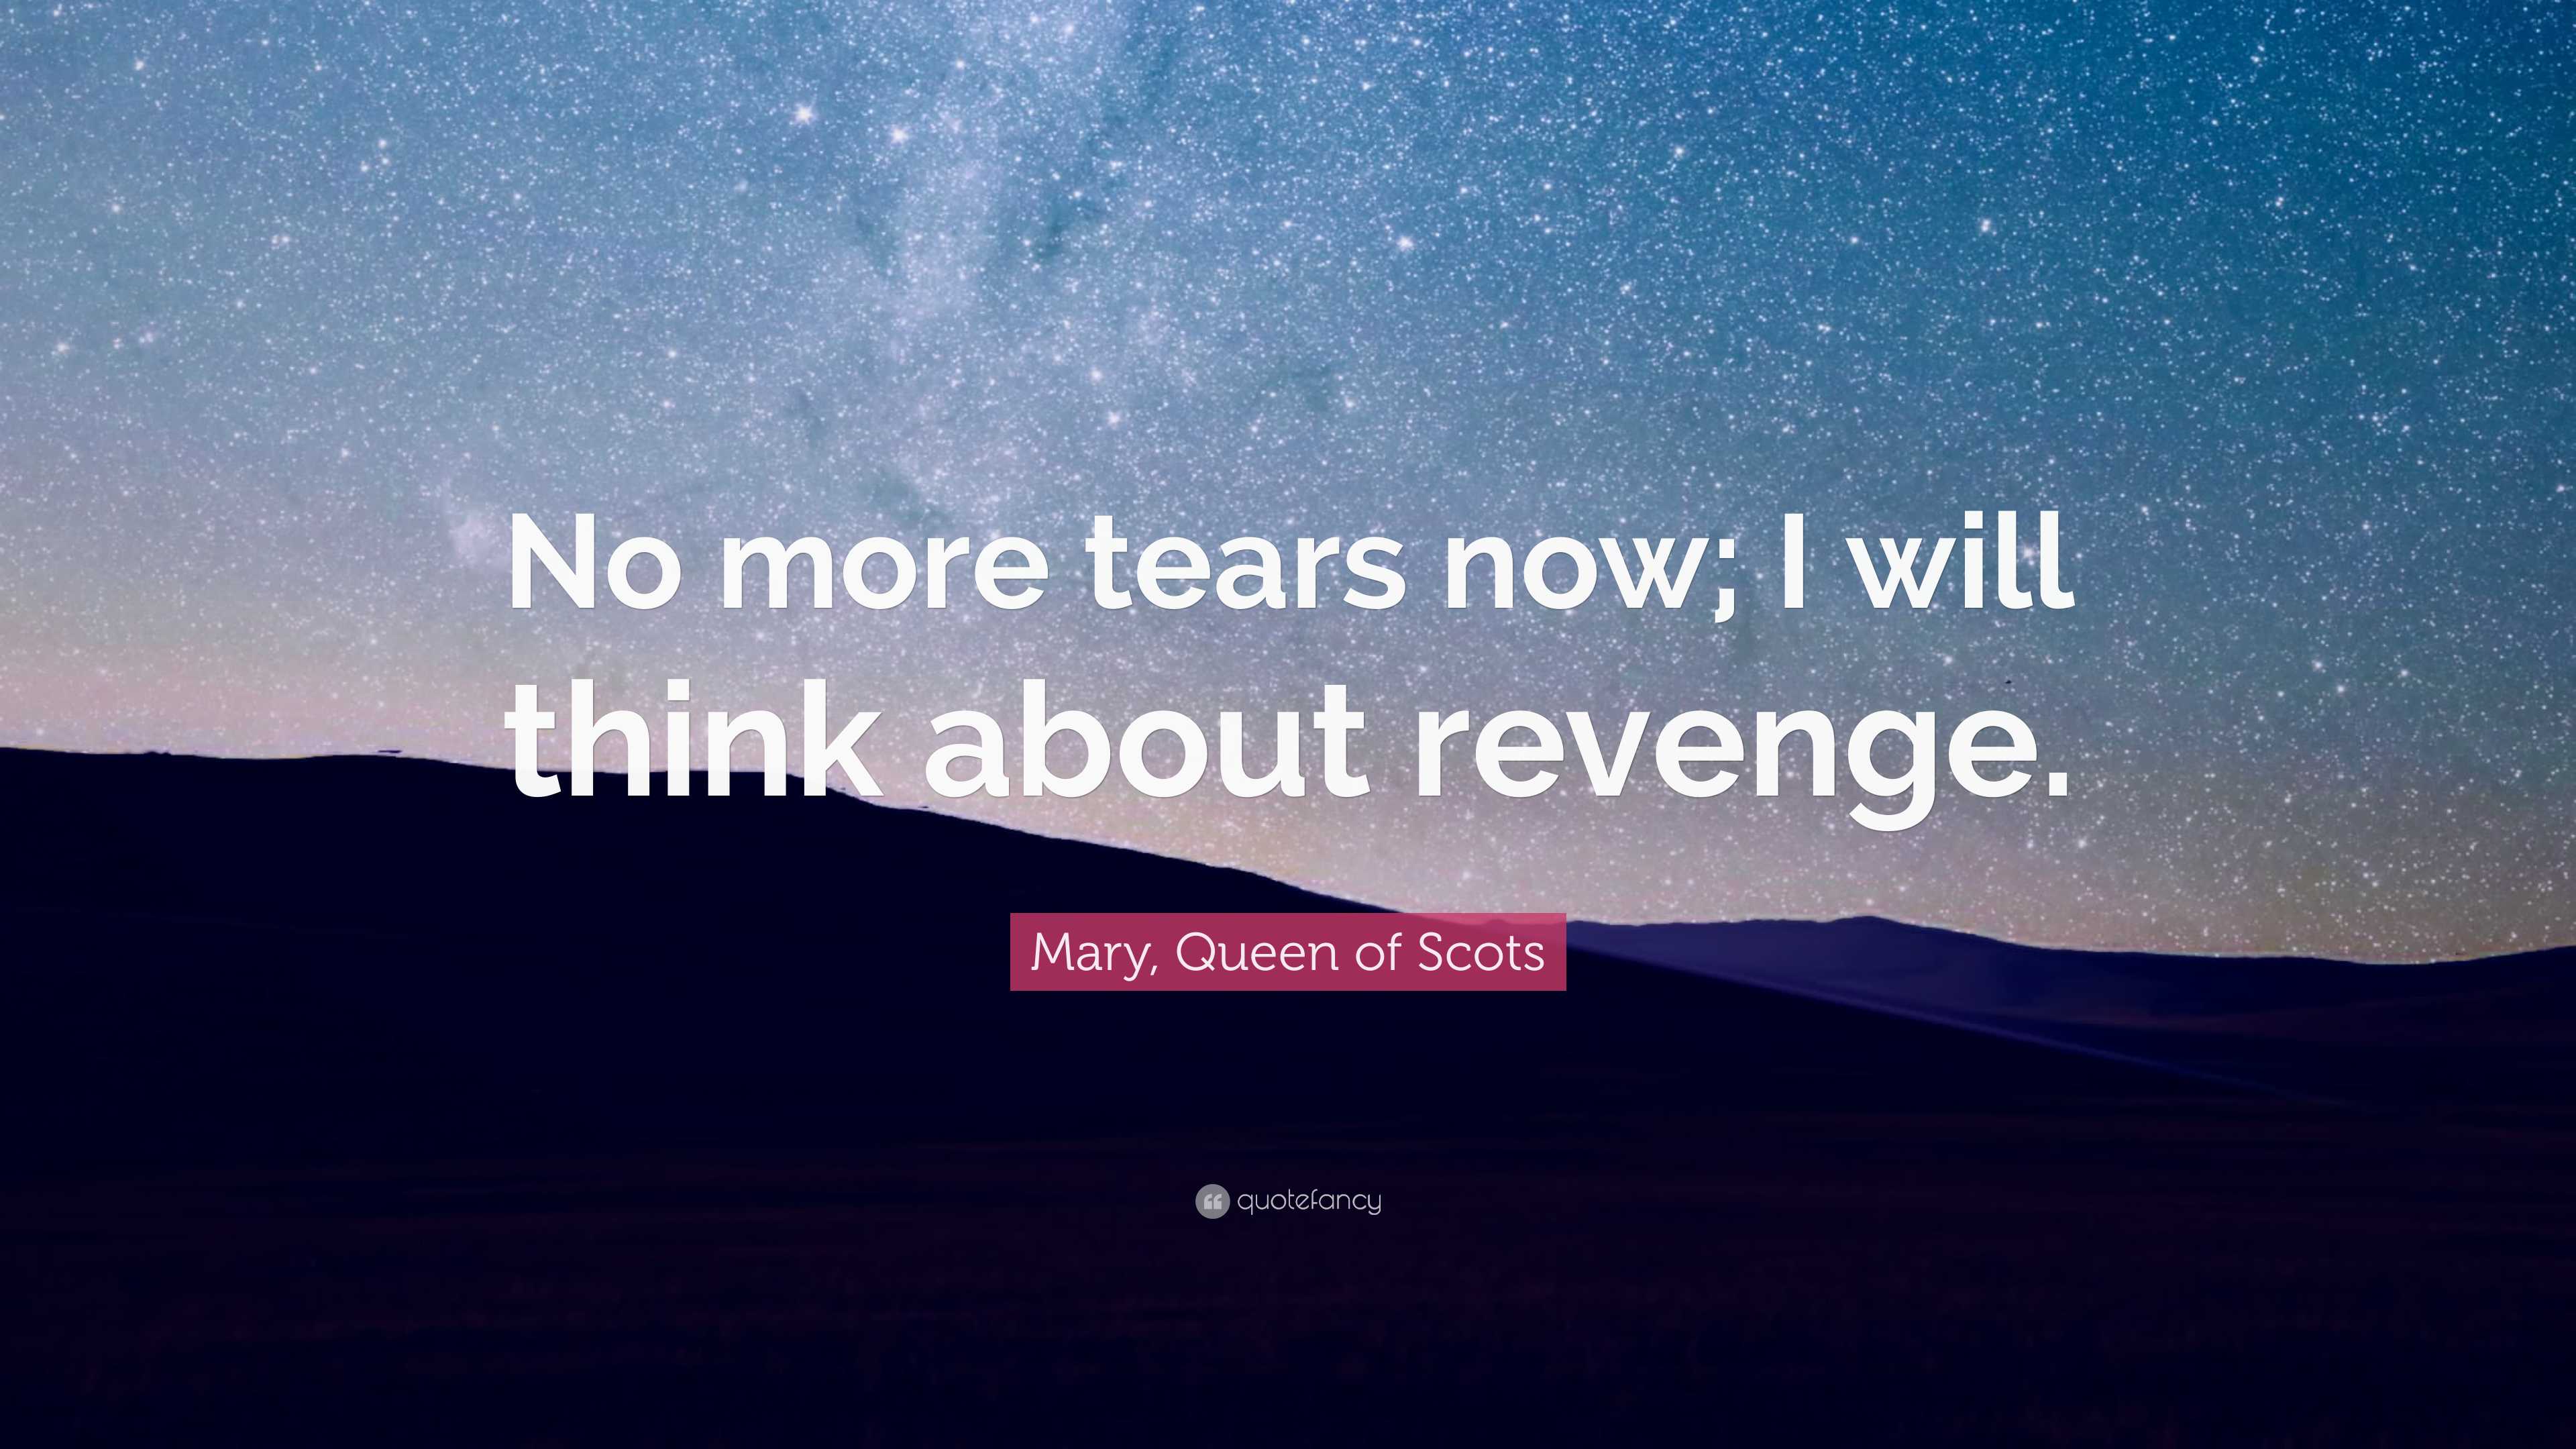 Queen Scots will now; I Quote: “No more of think Mary, tears about